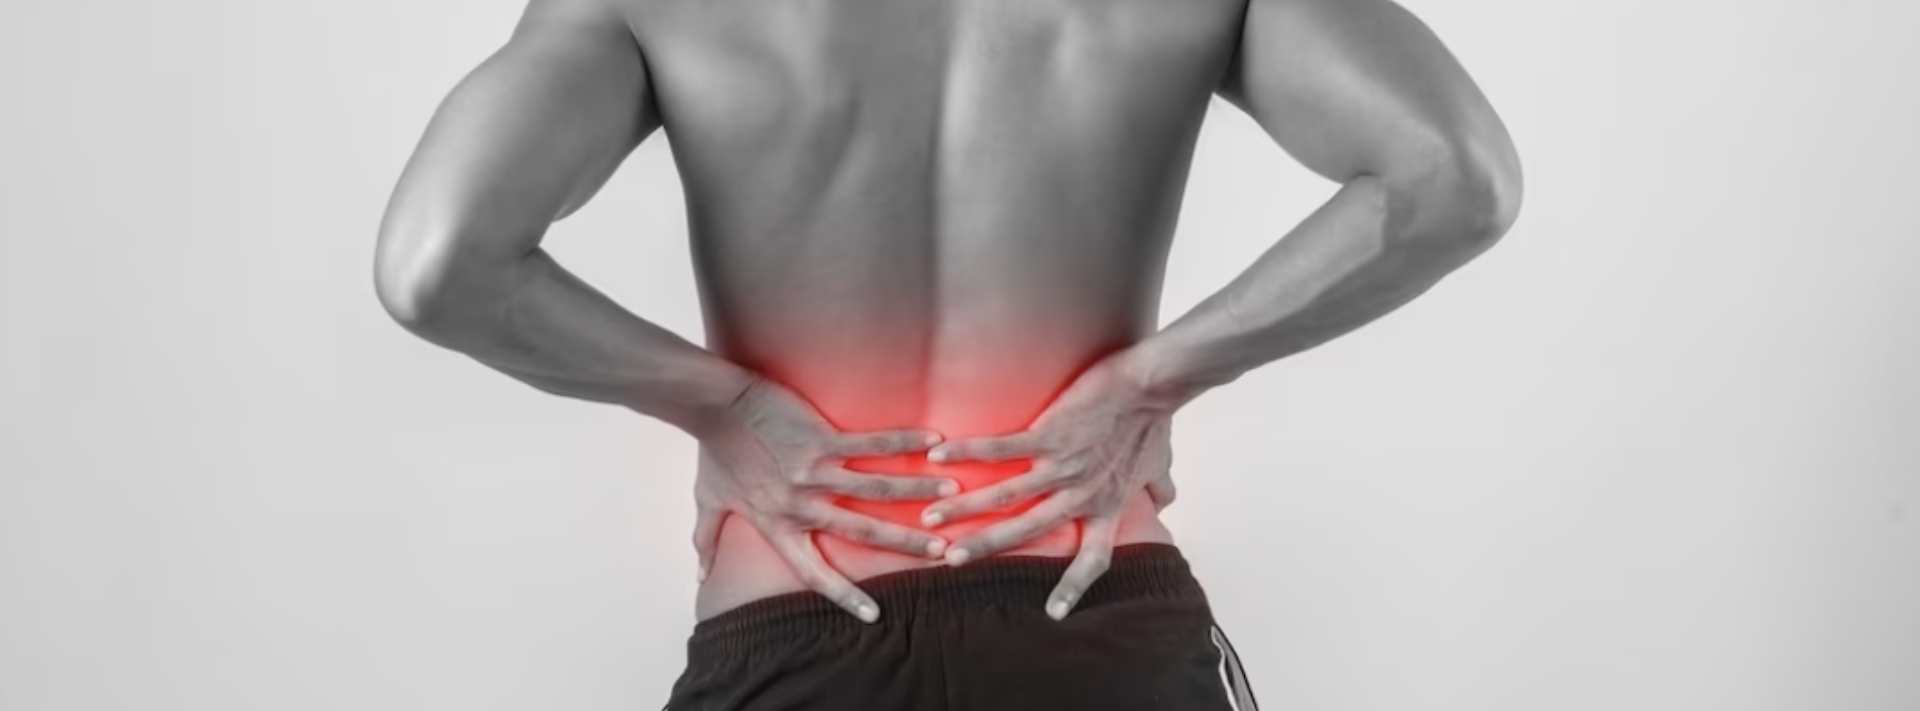 Treatment options for severe lower back pain | Refresh Mattress